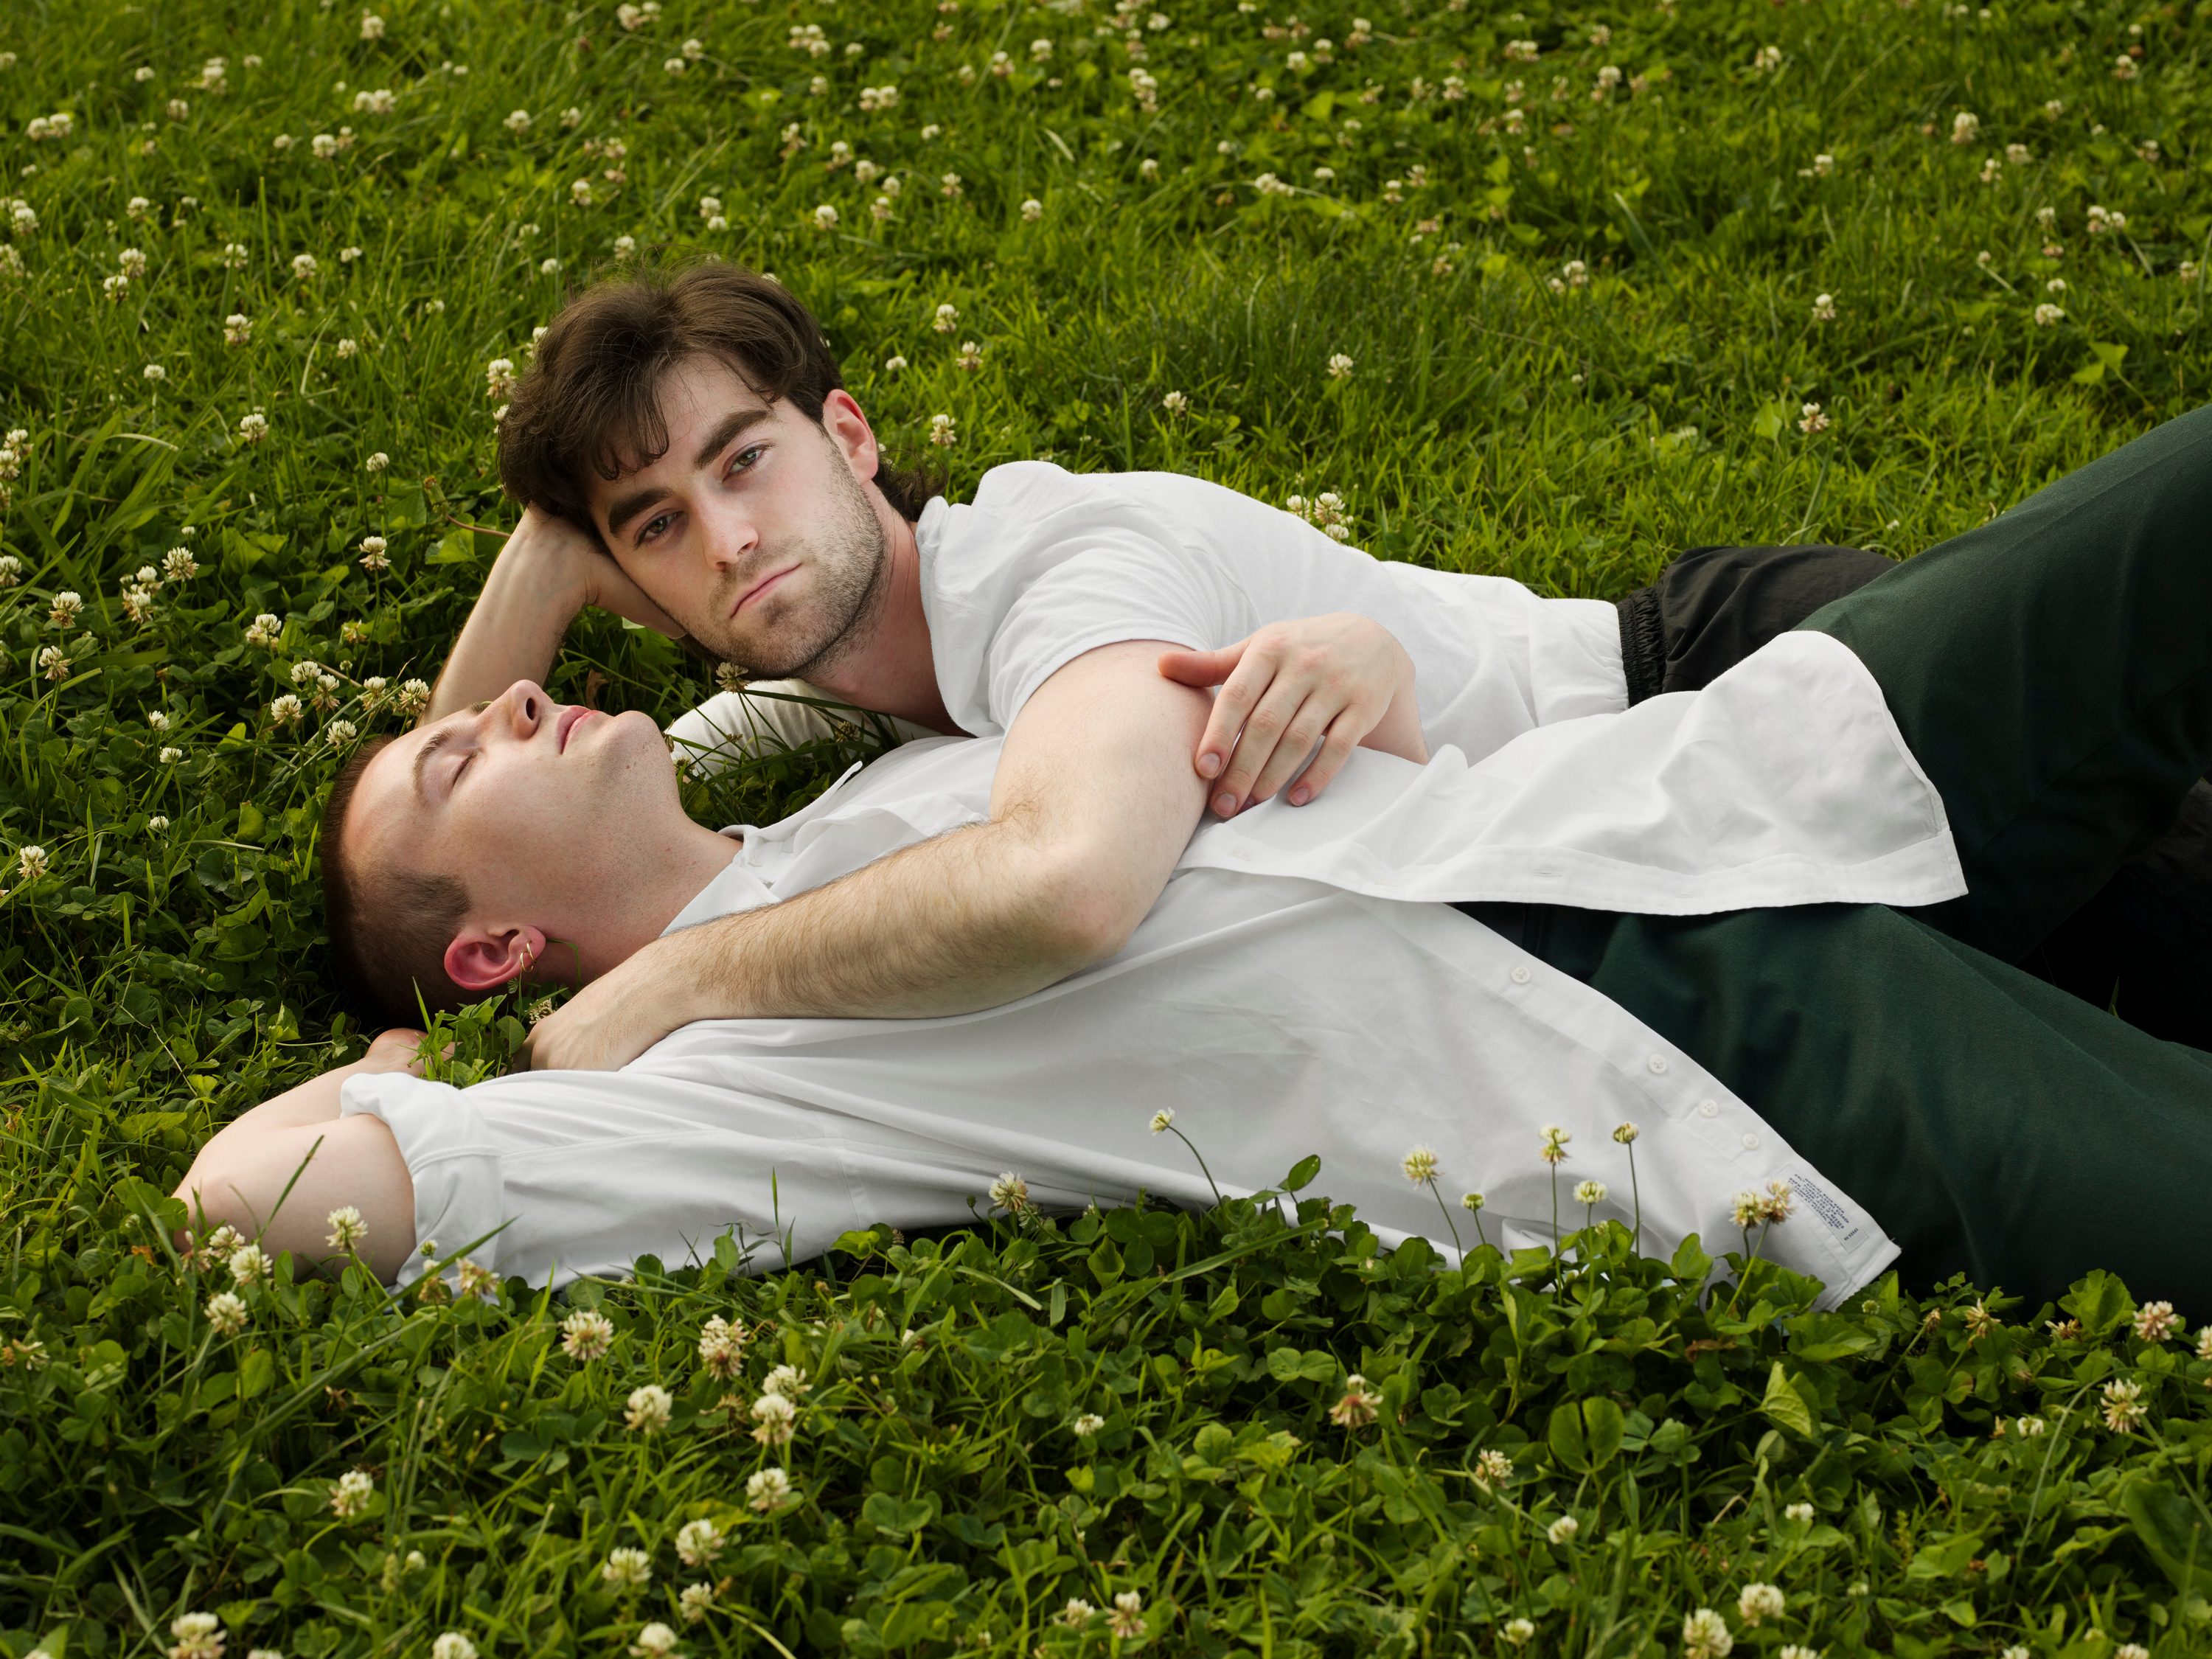 Two people relax in the grass. One person's head is back with closed eyes, the other looks at the camera.